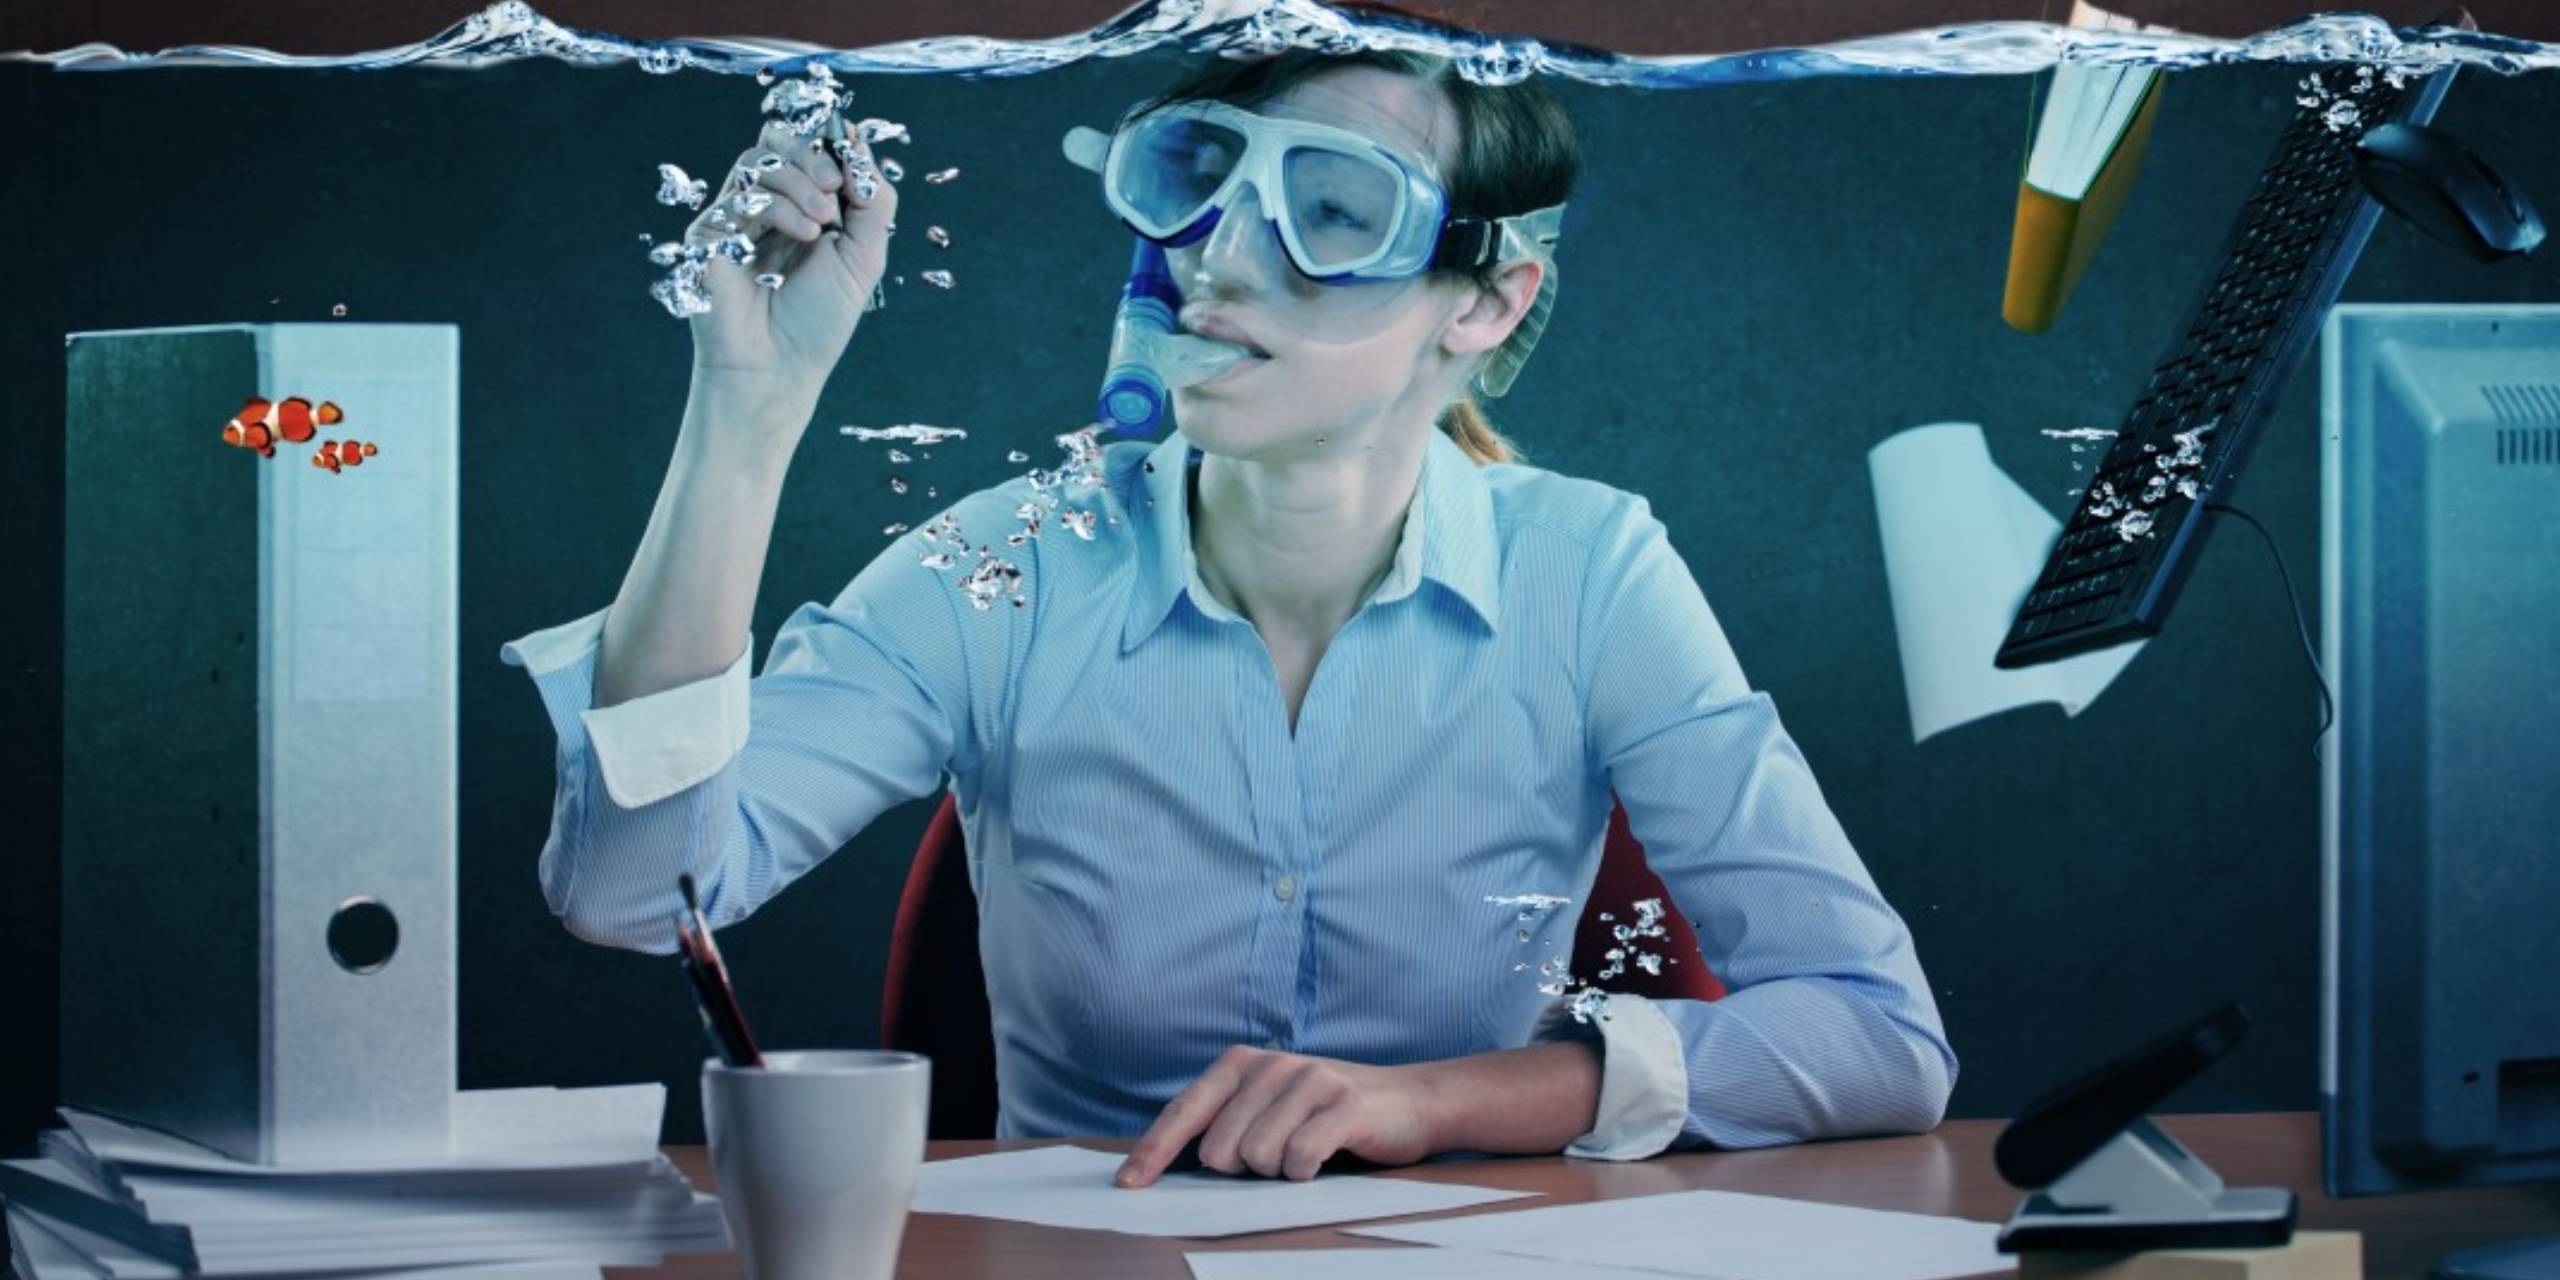 Is Your IT Department Drowning? Stop IT Headaches Before They Start with Candid8